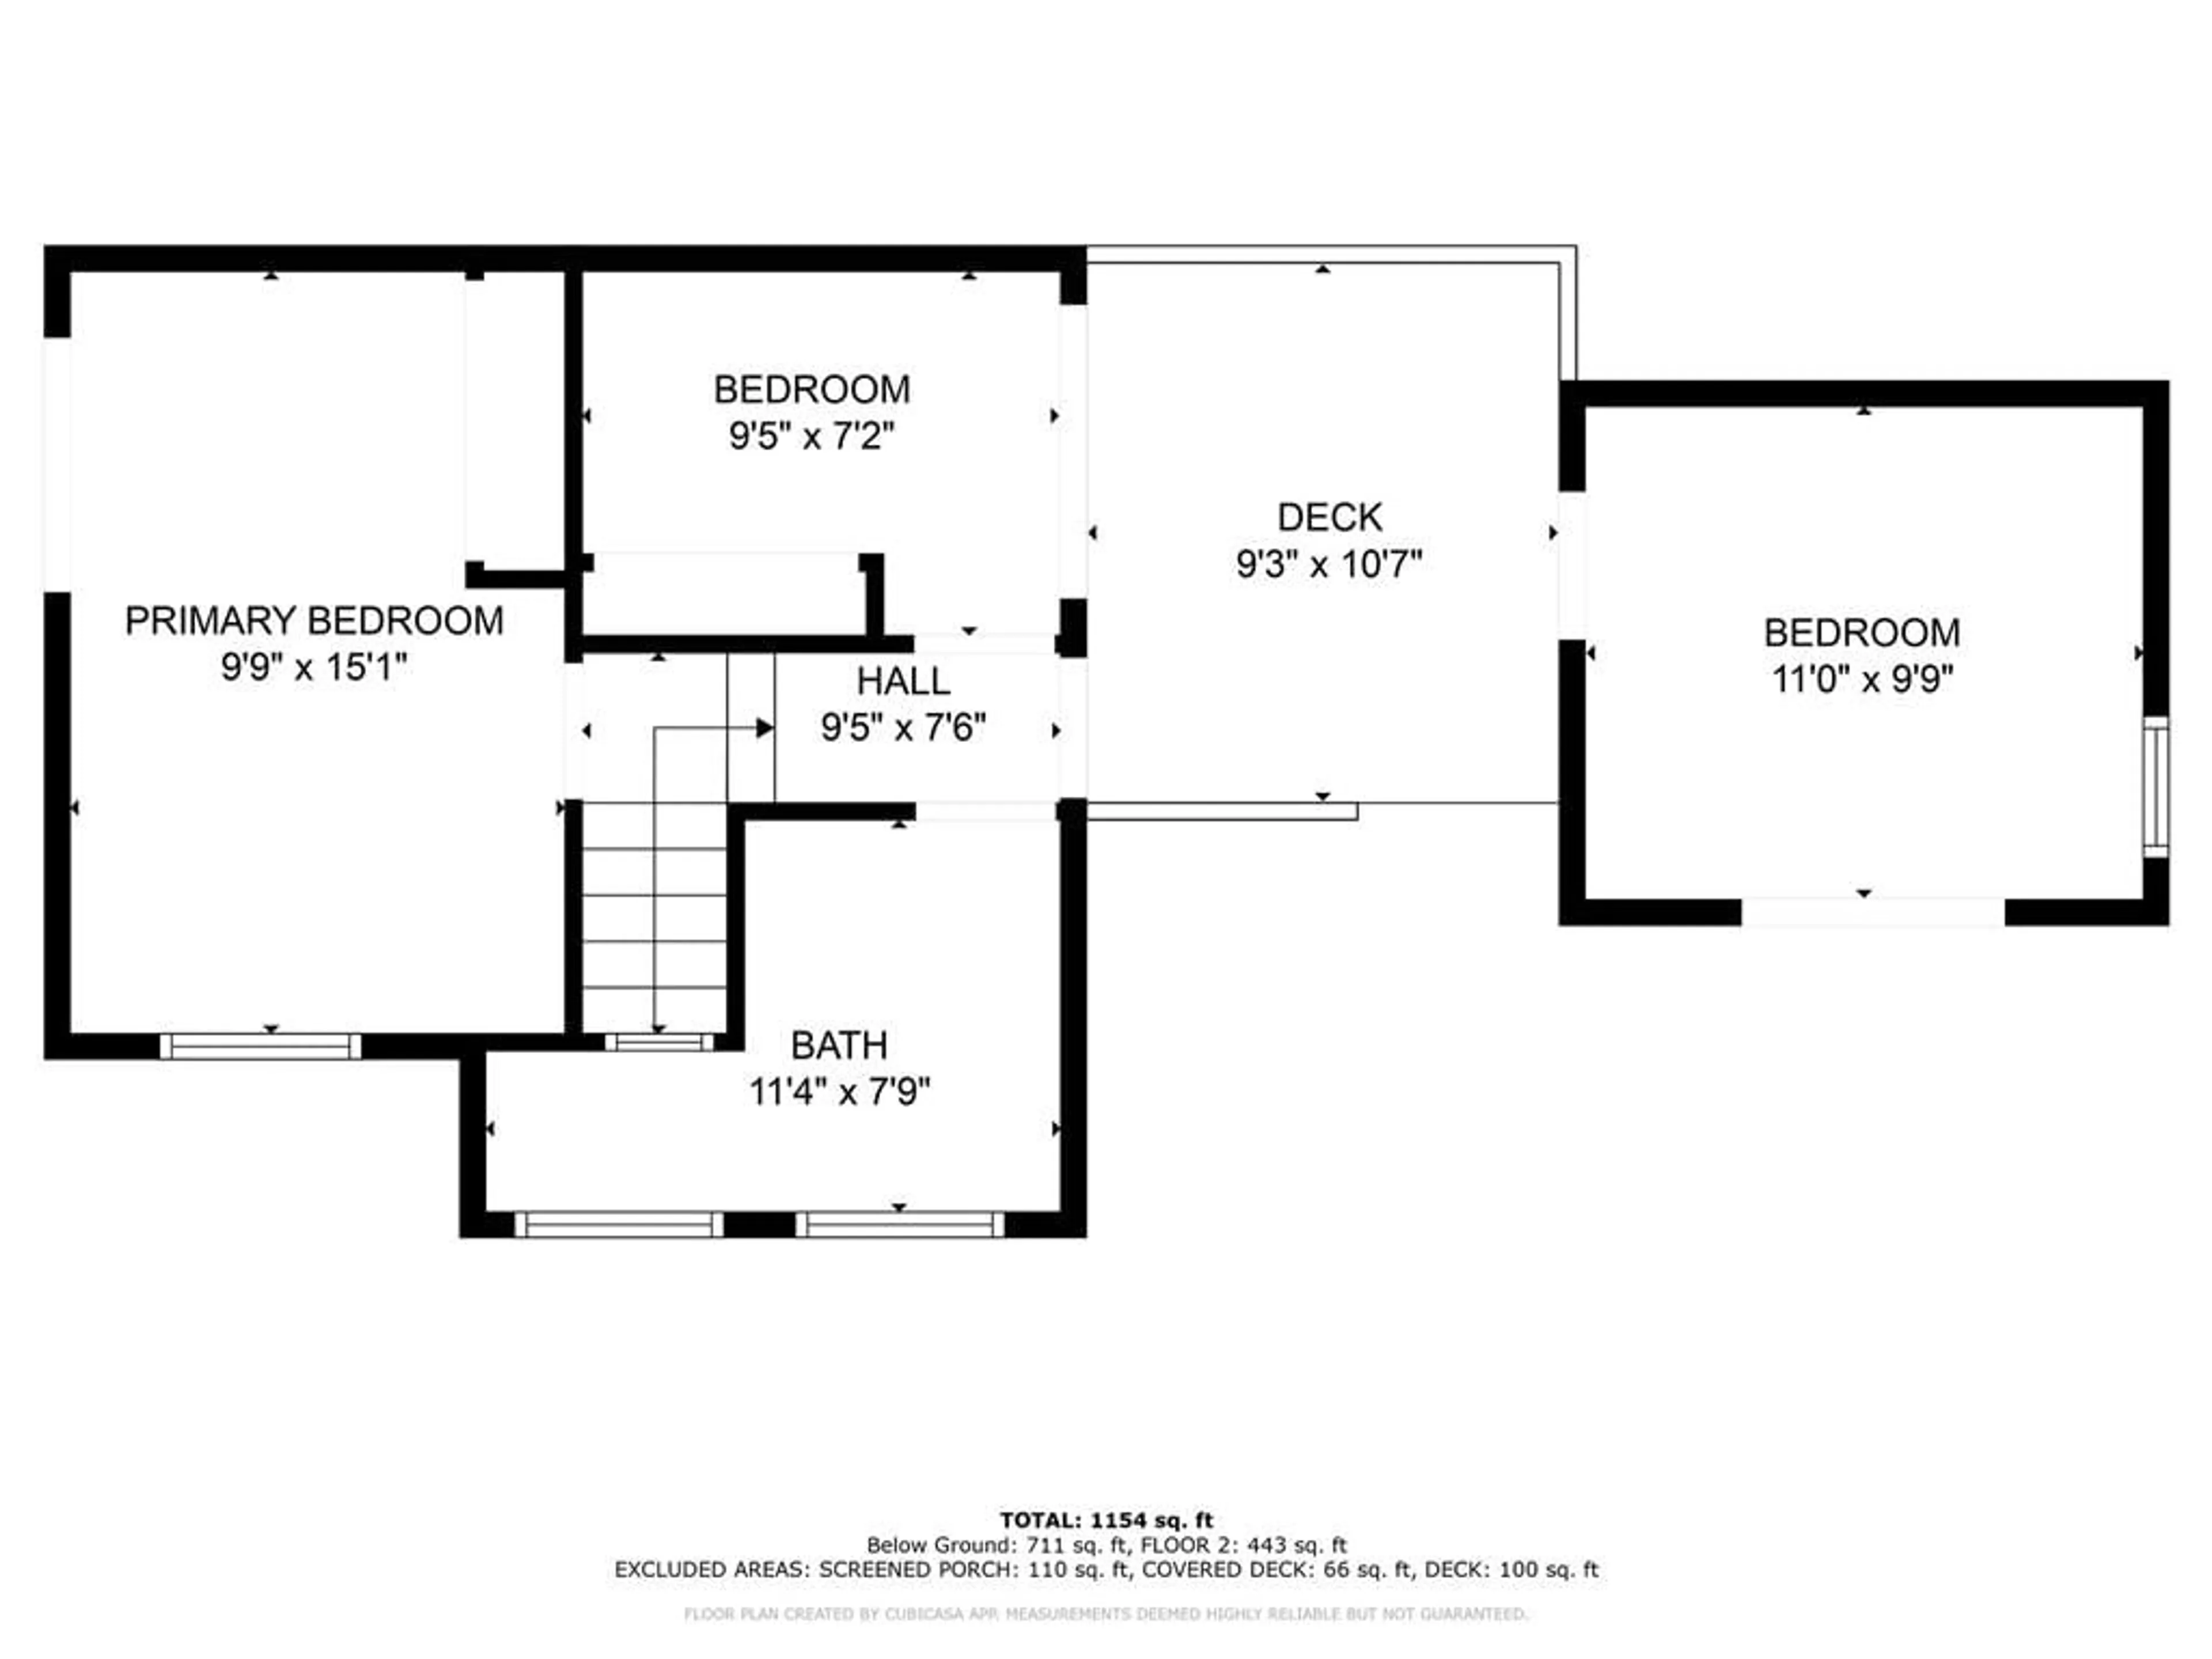 Floor plan for 5981 Severn River Shore, Coldwater Ontario P0E 1N0